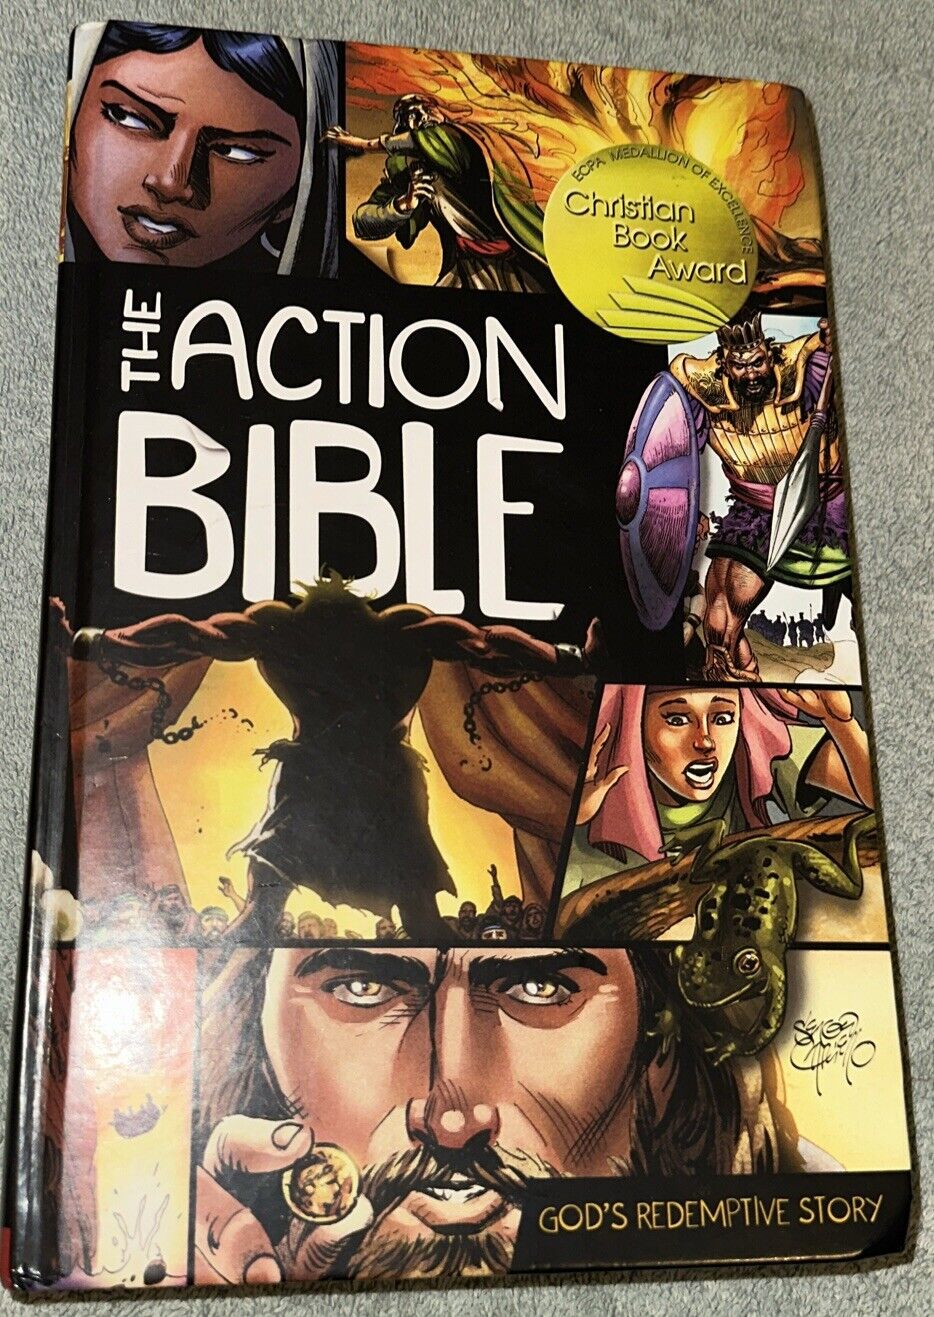 The Action Bible (David C. Cook, September 2010) Graphic Novel Style